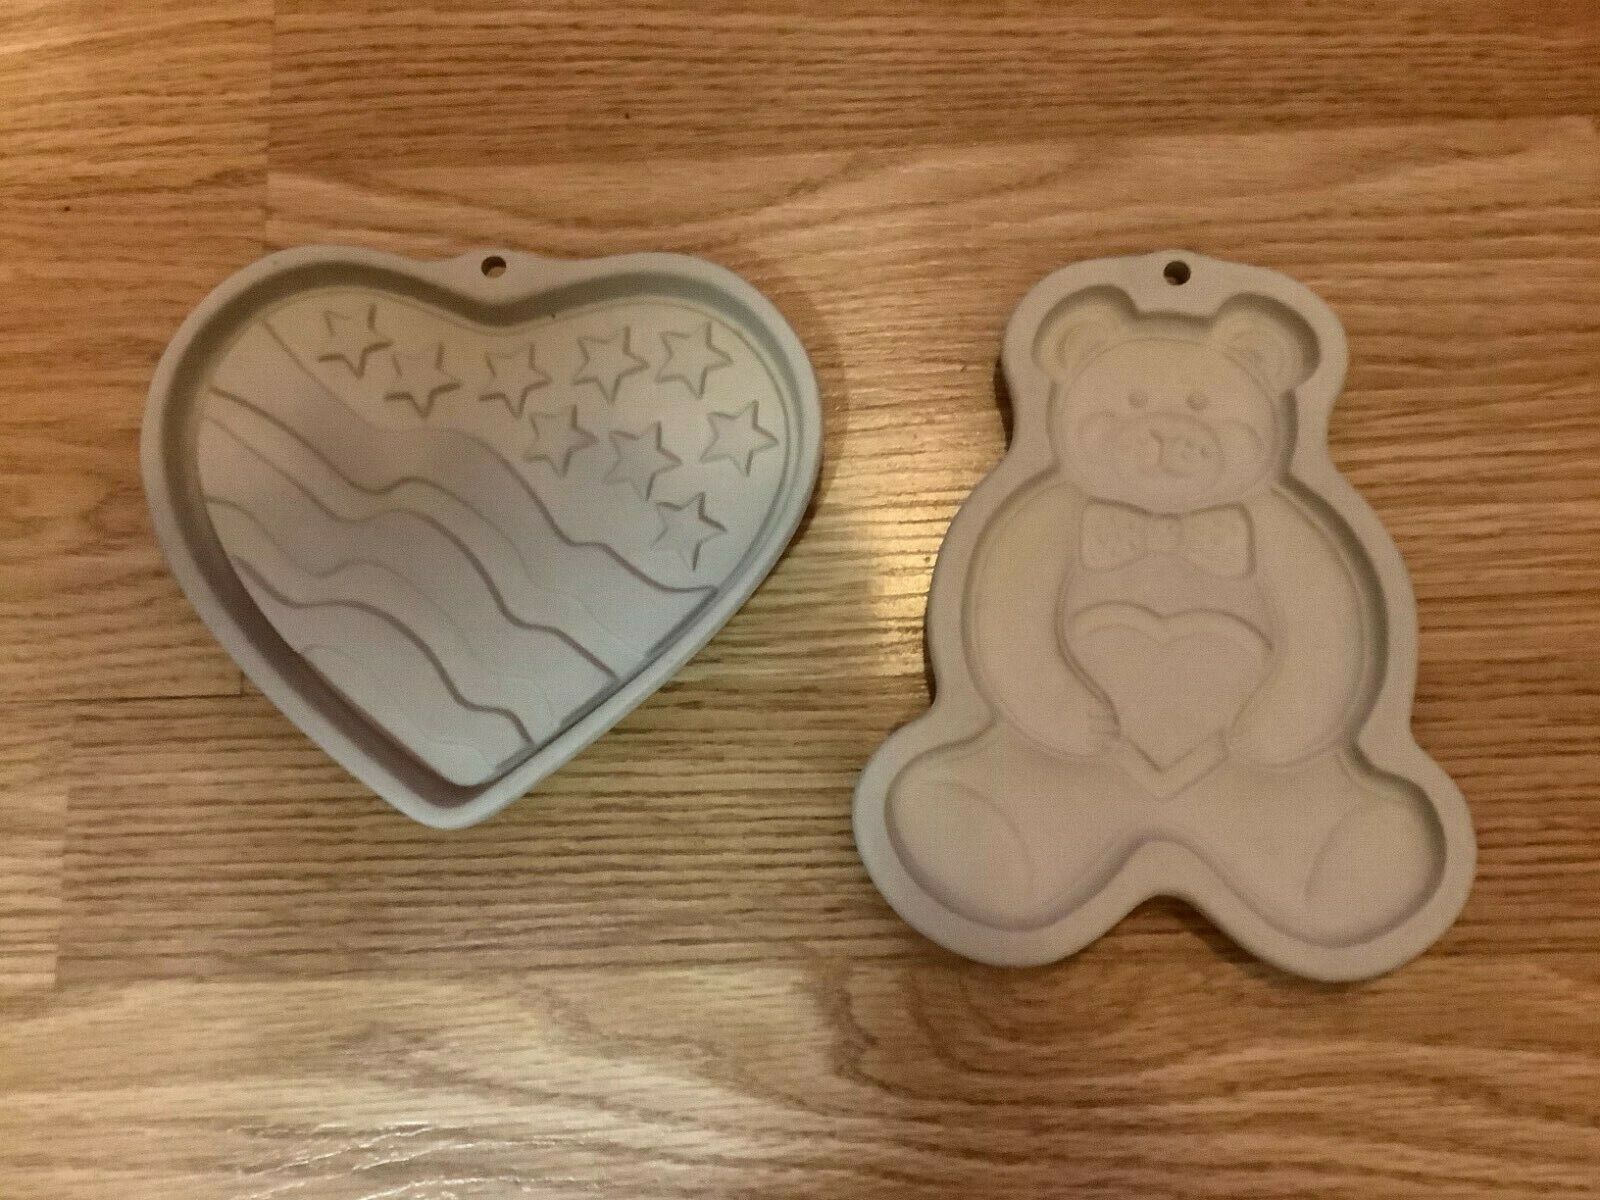 The Pampered Chef Cookie Molds, Teddy Bear & Patriotic Heart, Final Edition